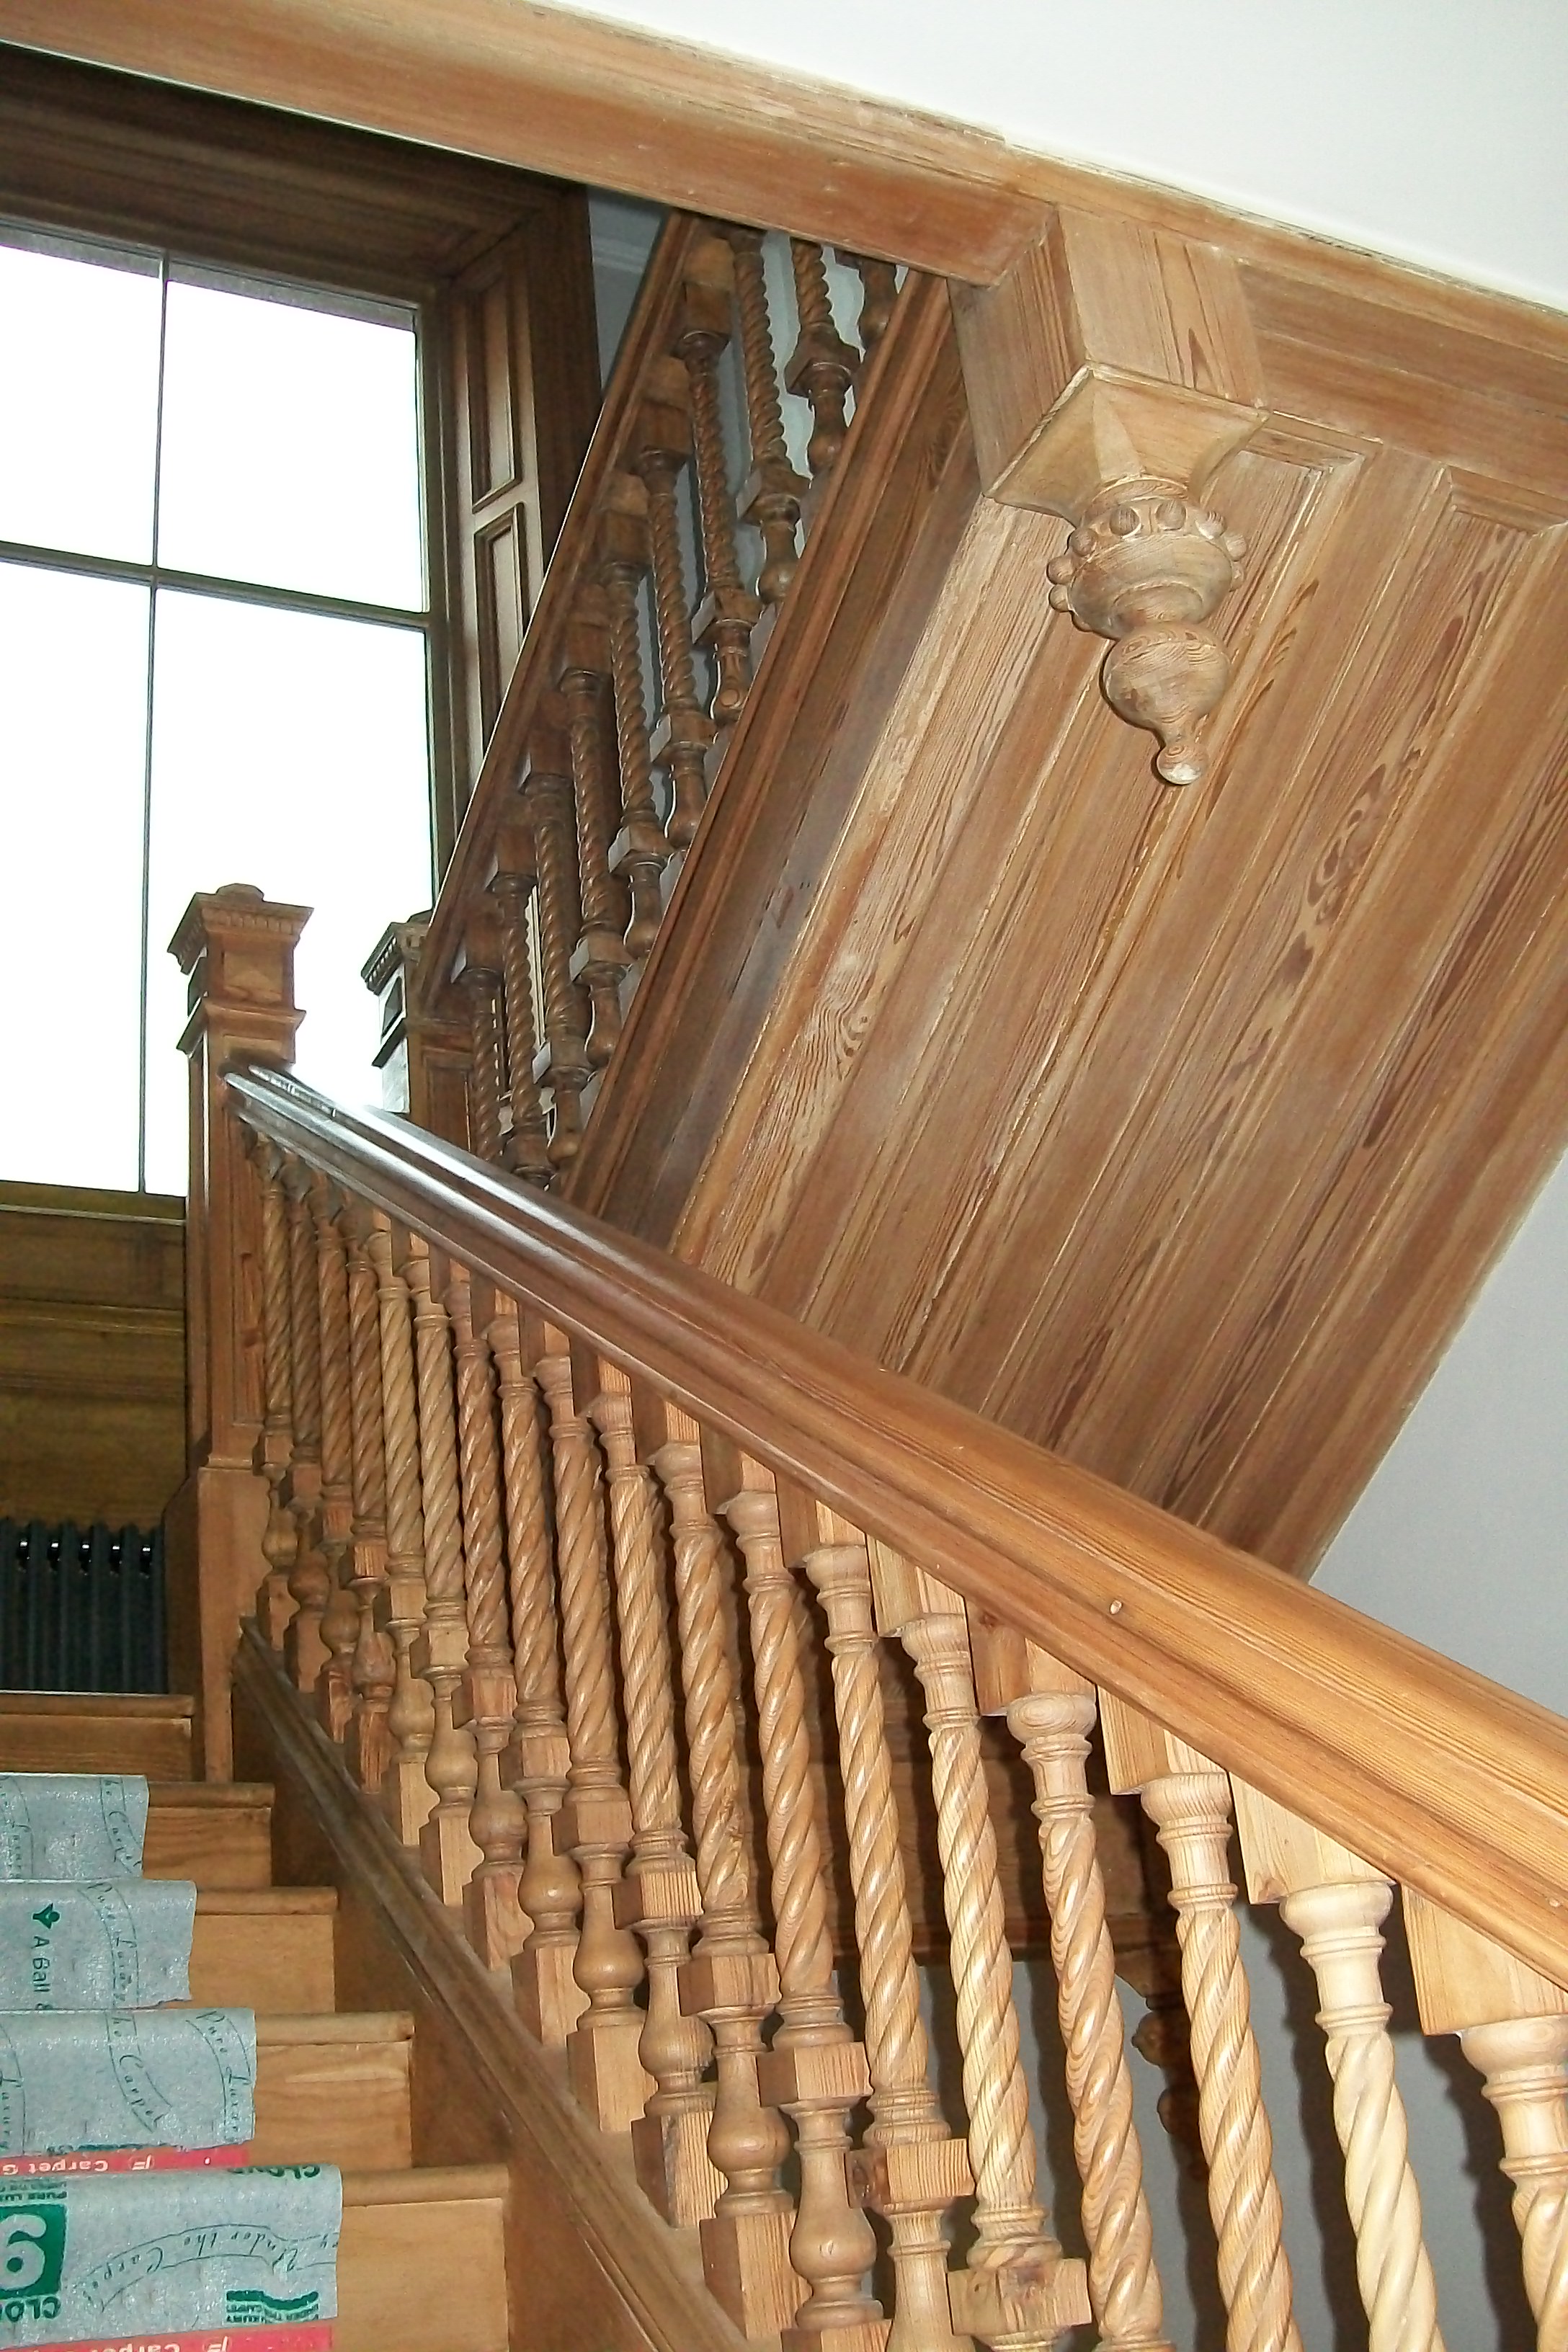 rope twist spindles, reclaimed, pitch pine, stair spindles, architectural joinery and turning, rope twist,specialist joinery, newel posts, finials, bespoke woodturning, Victorian joinery, Scotland,bespoke joinery, custom made joinery,